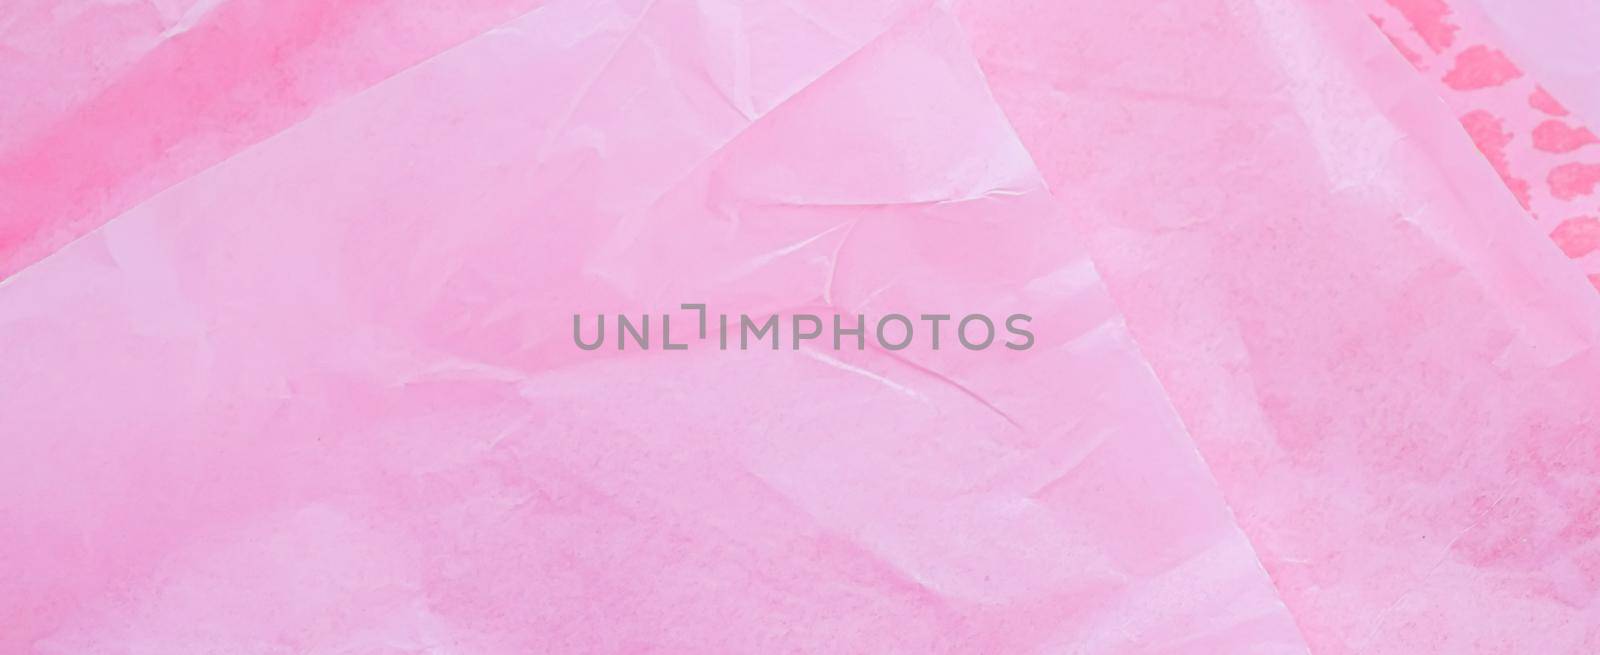 Pink tissue paper flatlay background, luxury branding flat lay and brand identity design for mockup by Anneleven